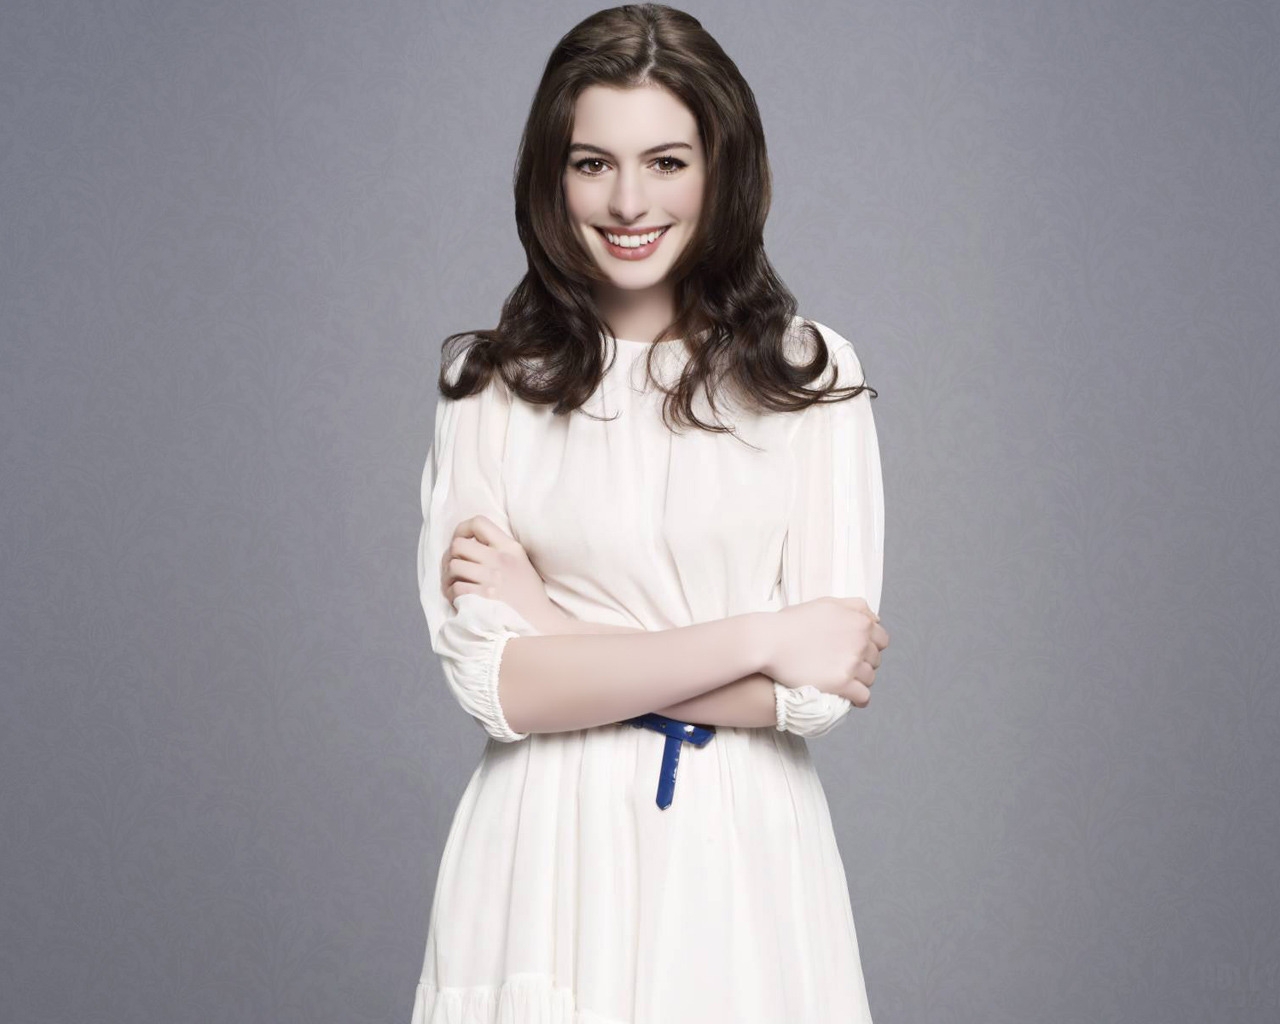 Cute Anne Hathaway for 1280 x 1024 resolution